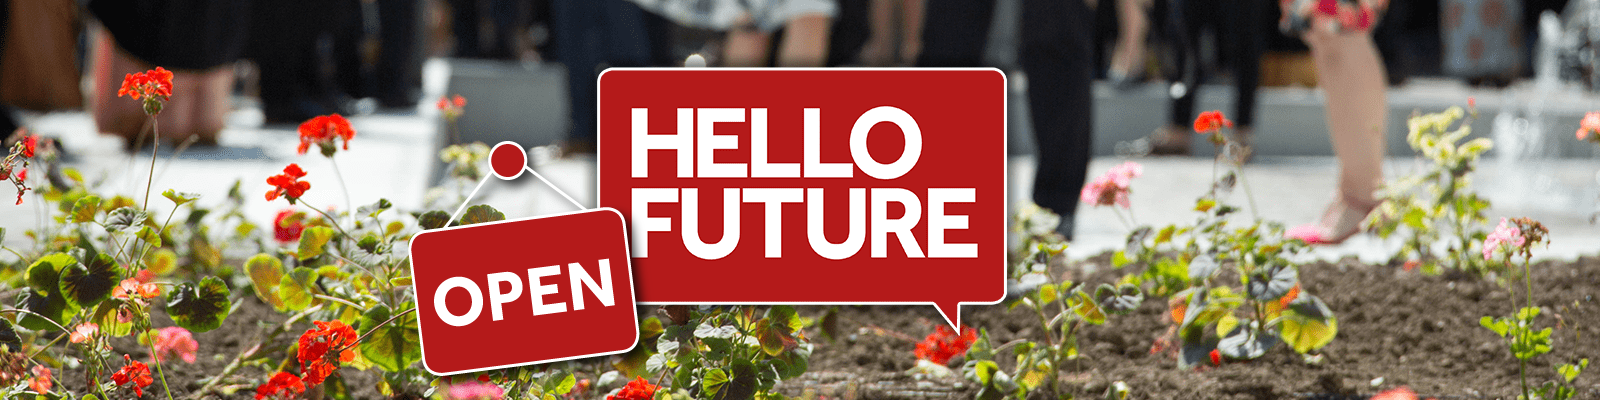 Hello Future logo set amongst flowers with an open sign.